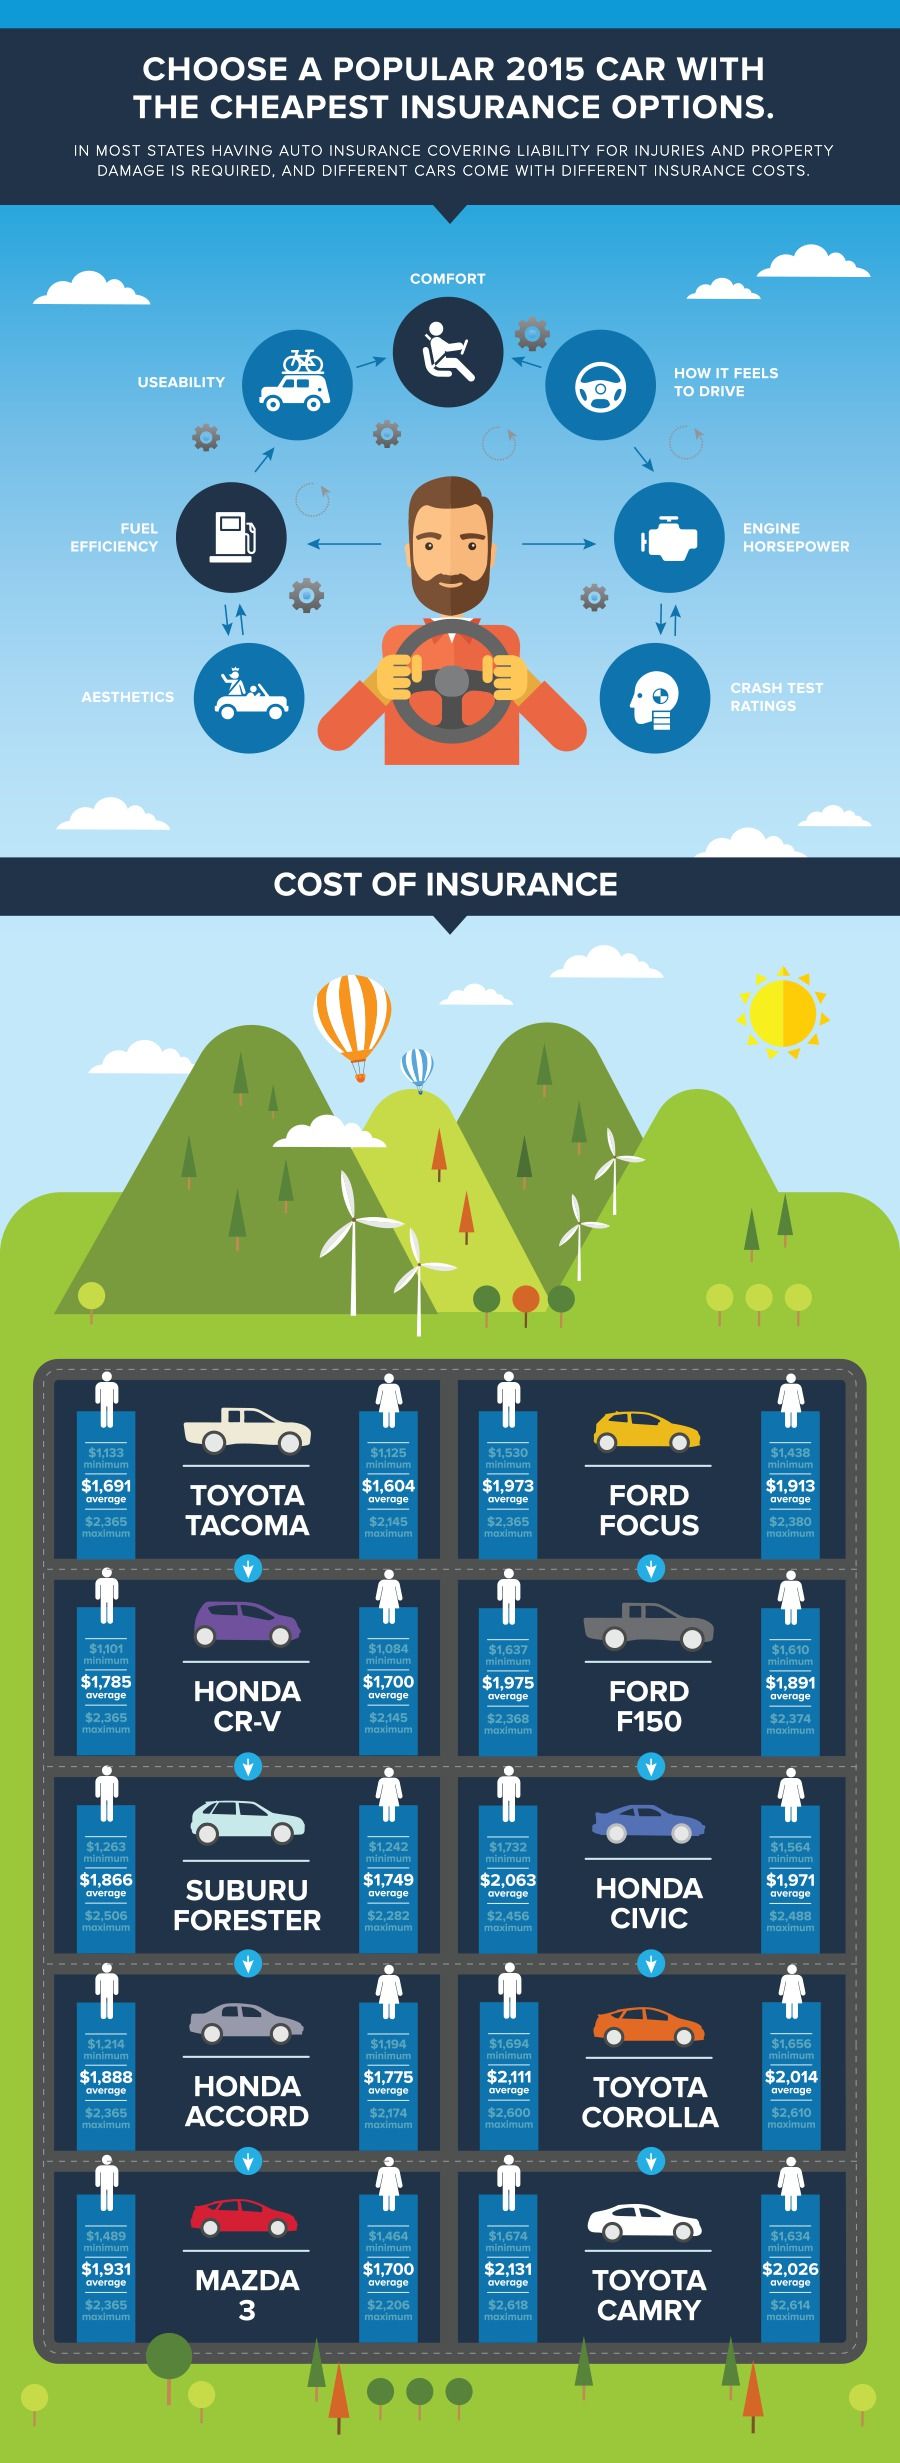 Choose a popular 2015 car with the cheapest insurance options